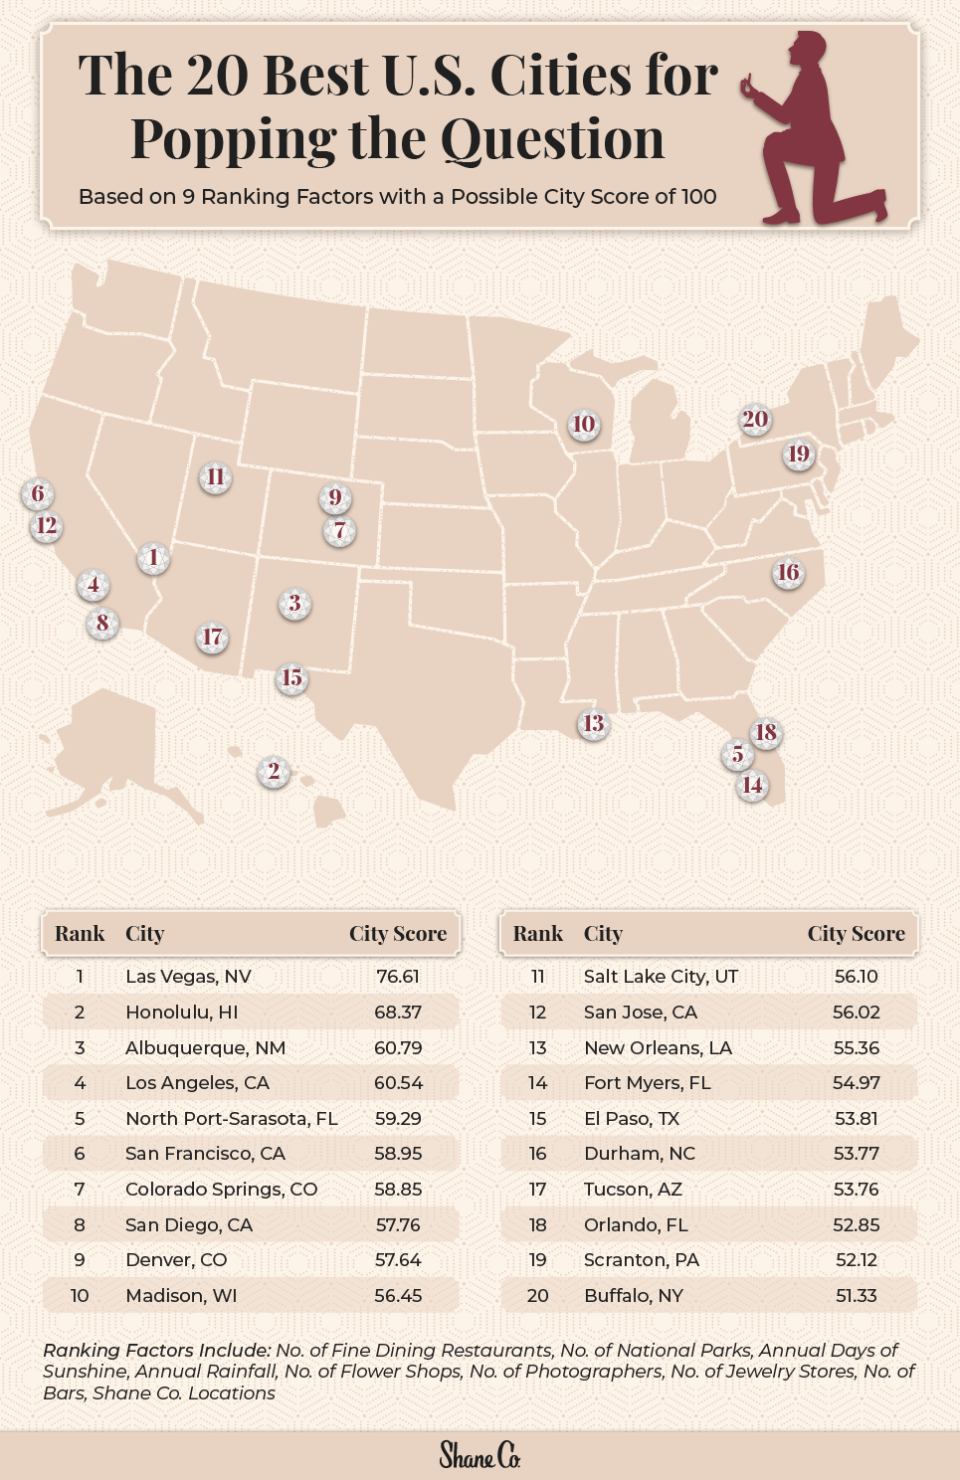 Proposal Hotspots Around the U.S. shows Sarasota in the top five cities for popping the question.